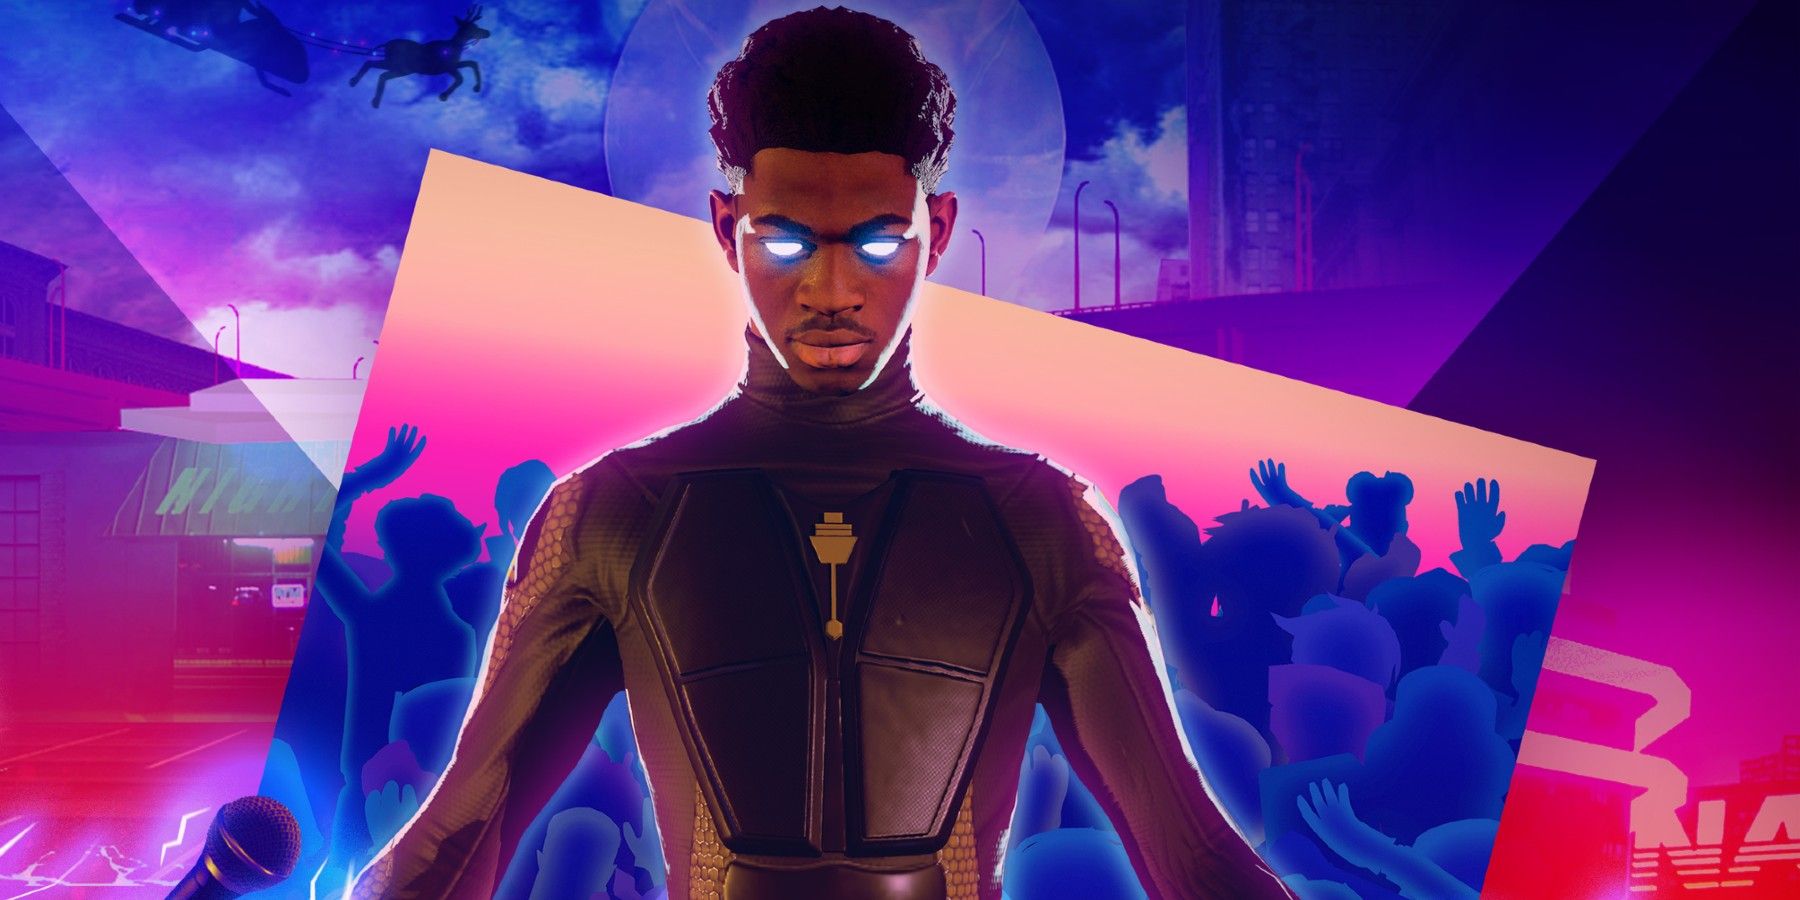 Roblox Books Lil Nas X For Fortnite Style In Game Concert Experience - roblox player one event wings